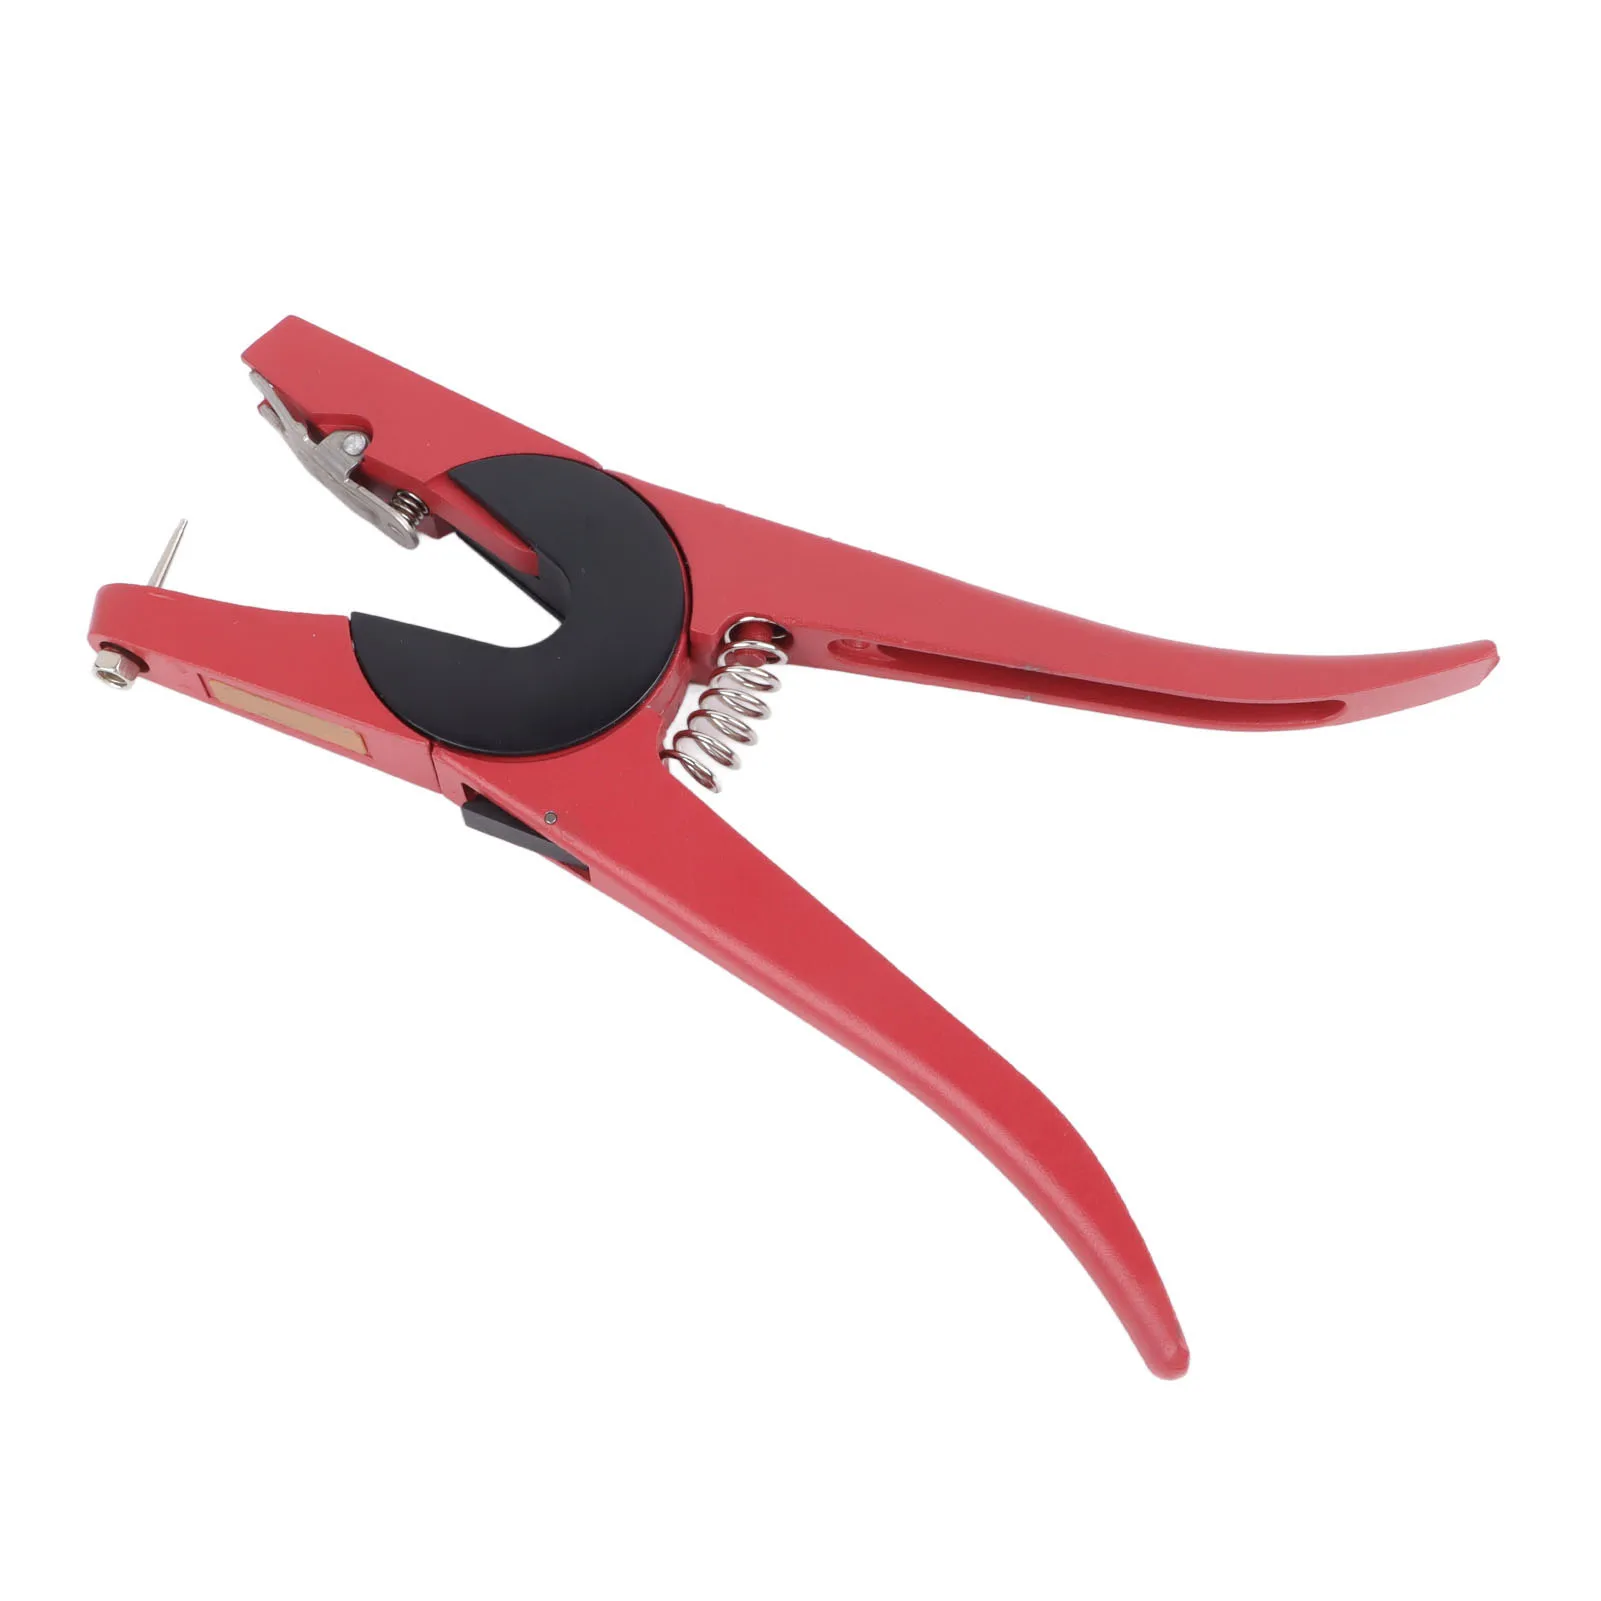 Livestock Ear Tag Pliers Professional Automatic Rebound Animal Ear Tag Plier for Pigs Cows Catt